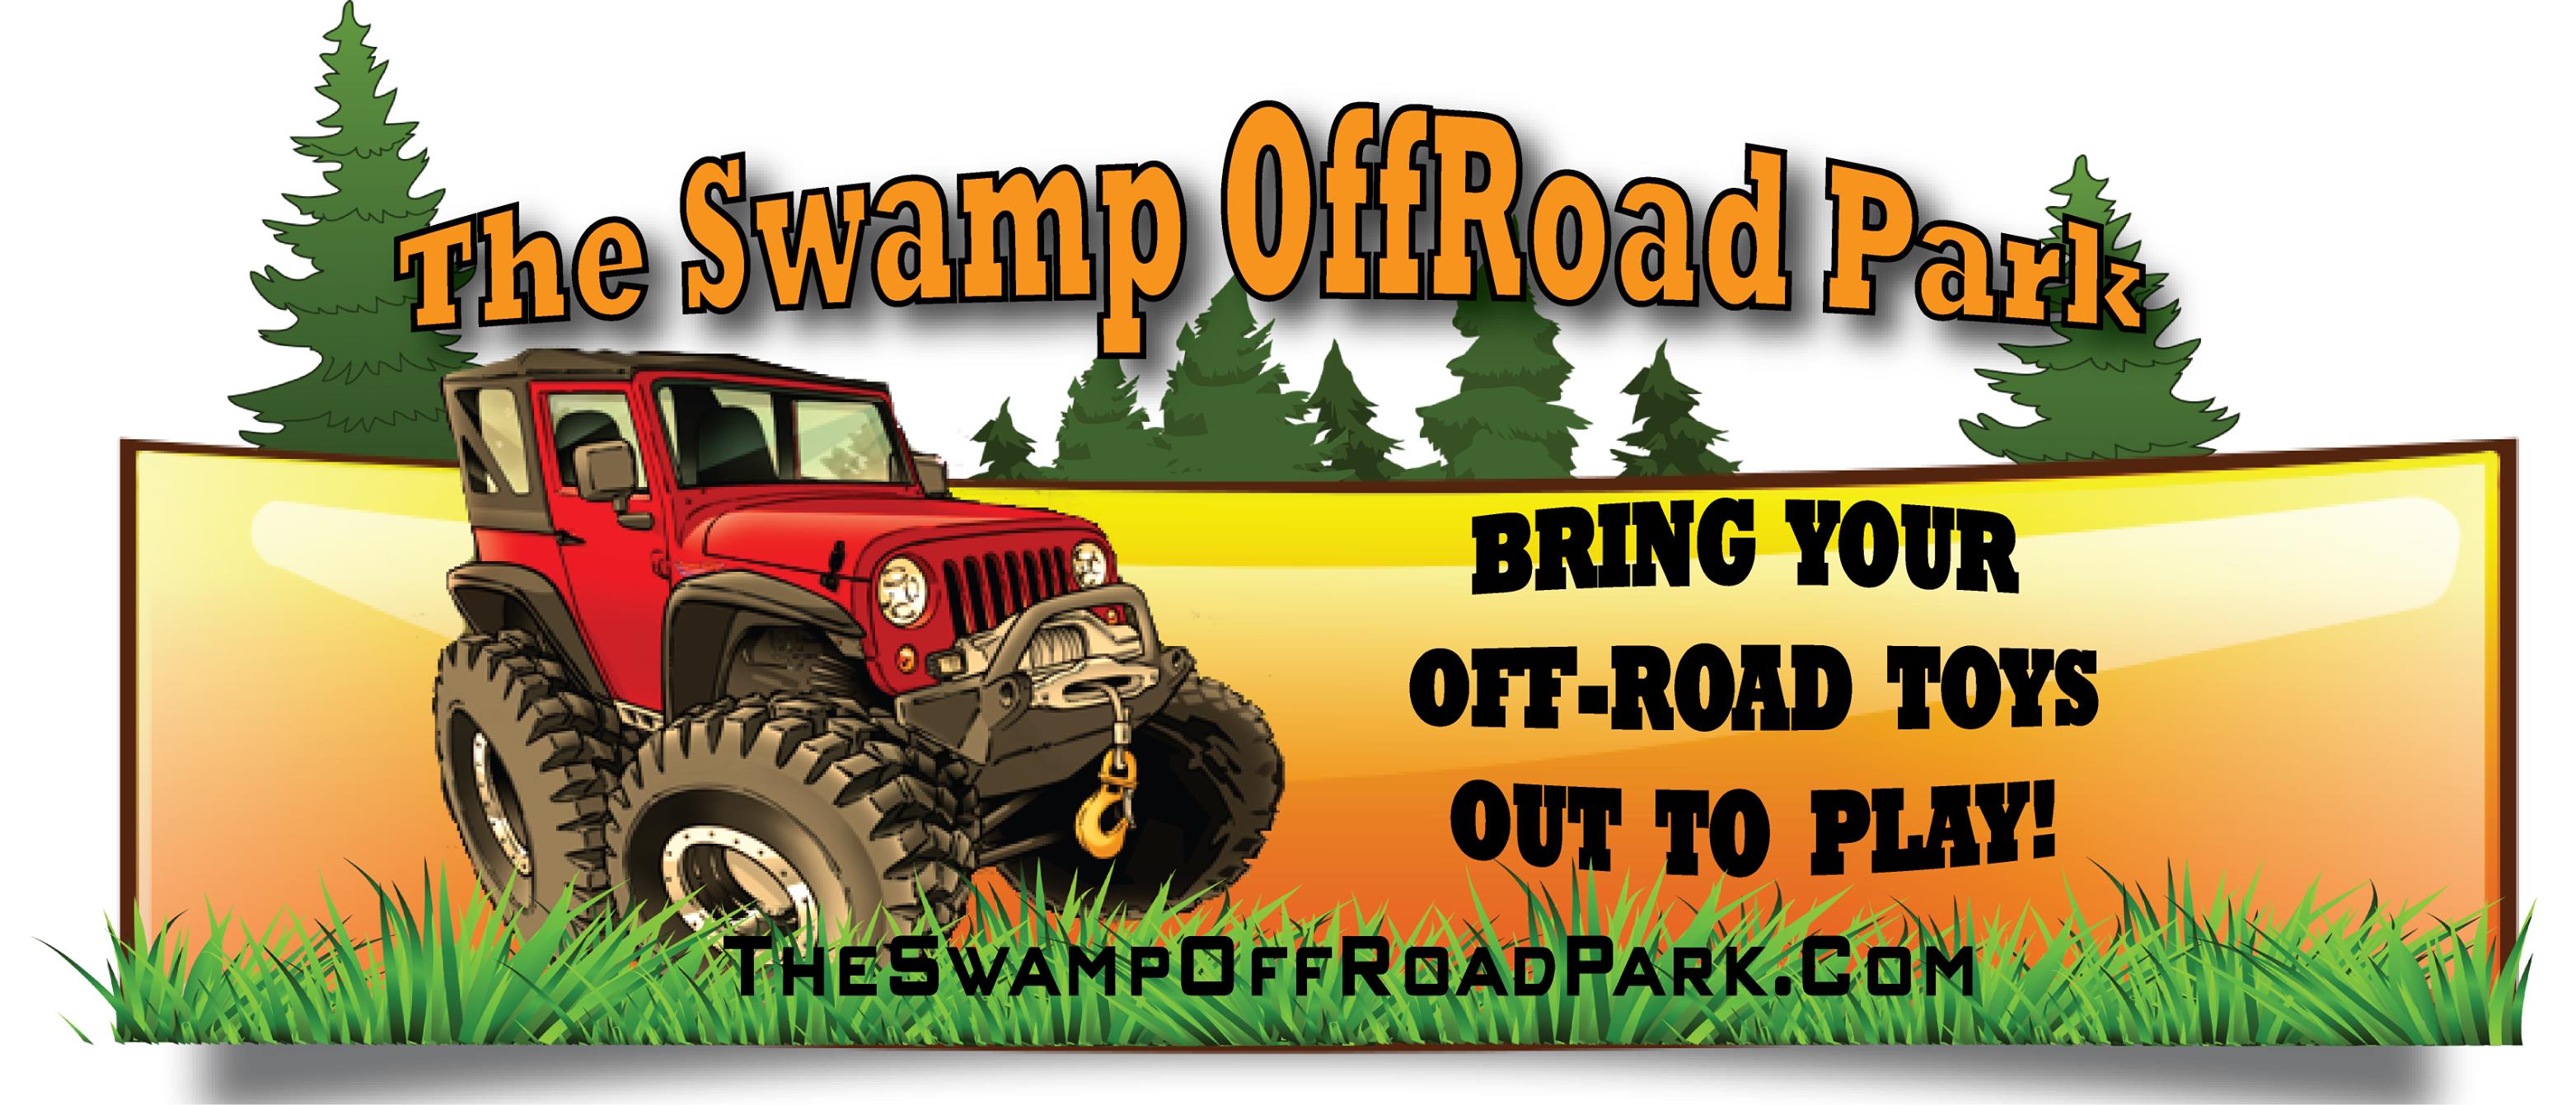 The Swamp OffRoad Park - Logo